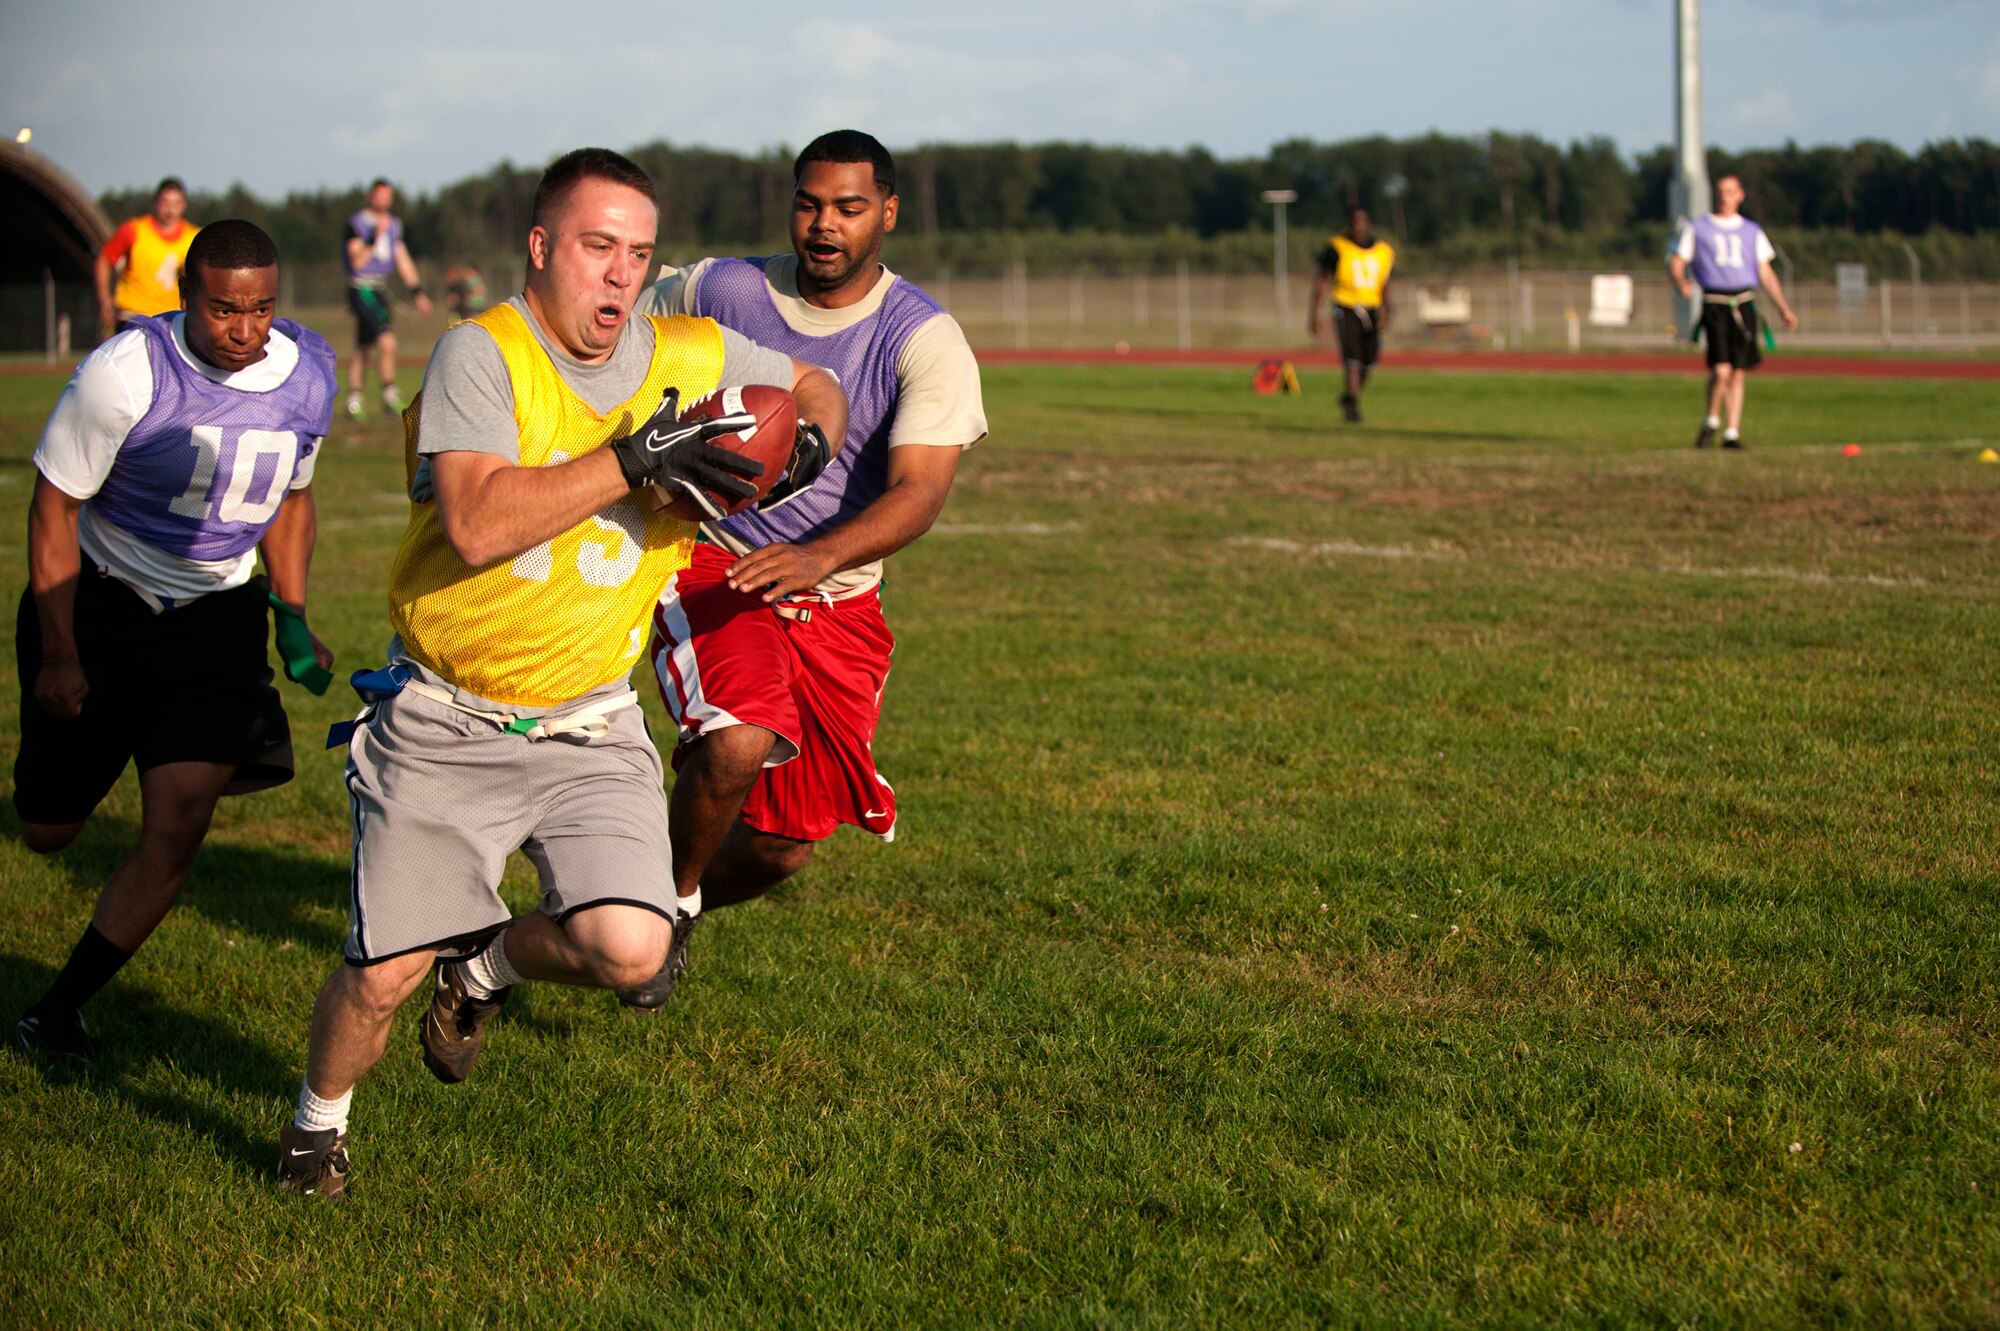 SPANGDAHLEM AIR BASE, Germany – Nathan Denn, 52nd Aircraft Maintenance Squadron NCO in charge of supply, sprints toward the end zone during a flag football game near the Skelton Memorial Fitness Center here Sept. 5.  Denn assisted his team’s first victory of the season by scoring two of the four touchdowns.  The flag football season will continue until Oct. 31, thereafter the top eight teams will compete for the base championship title in a single elimination tournament. (U.S. Air Force photo by Airman 1st Class Gustavo Castillo/Released)